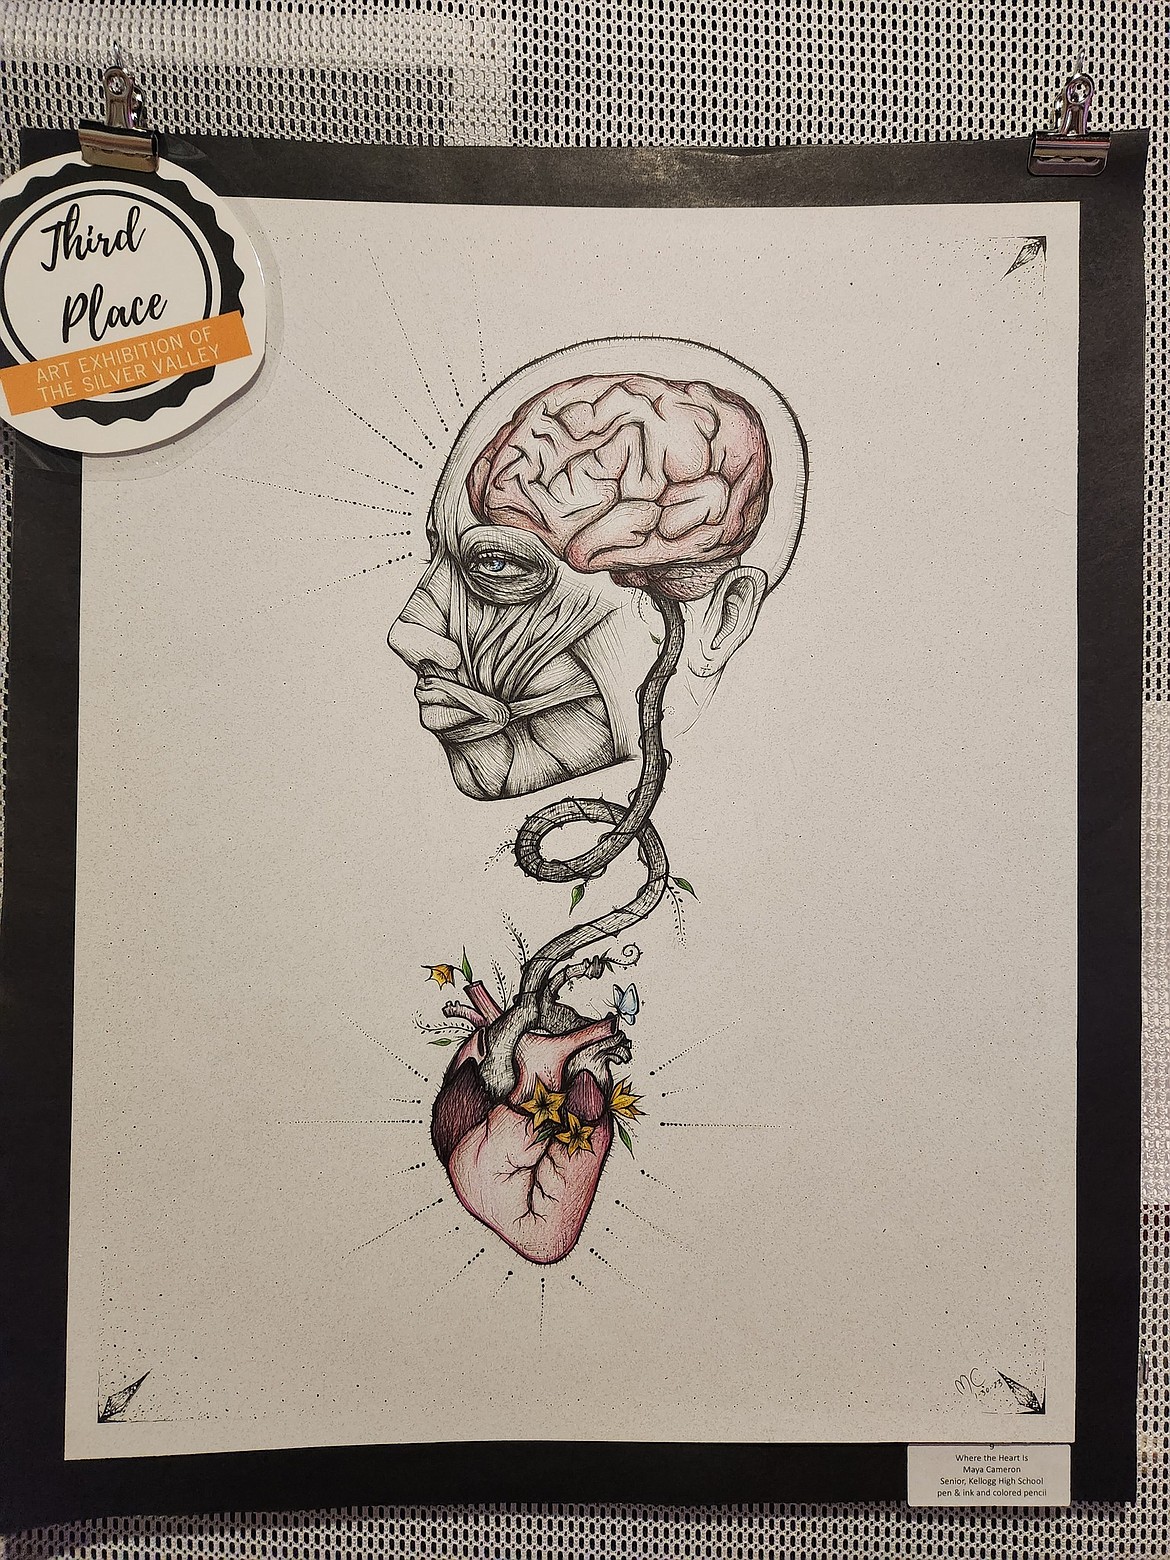 3RD PLACE: “Where the Heart Is” by Maya Cameron (Kellogg)